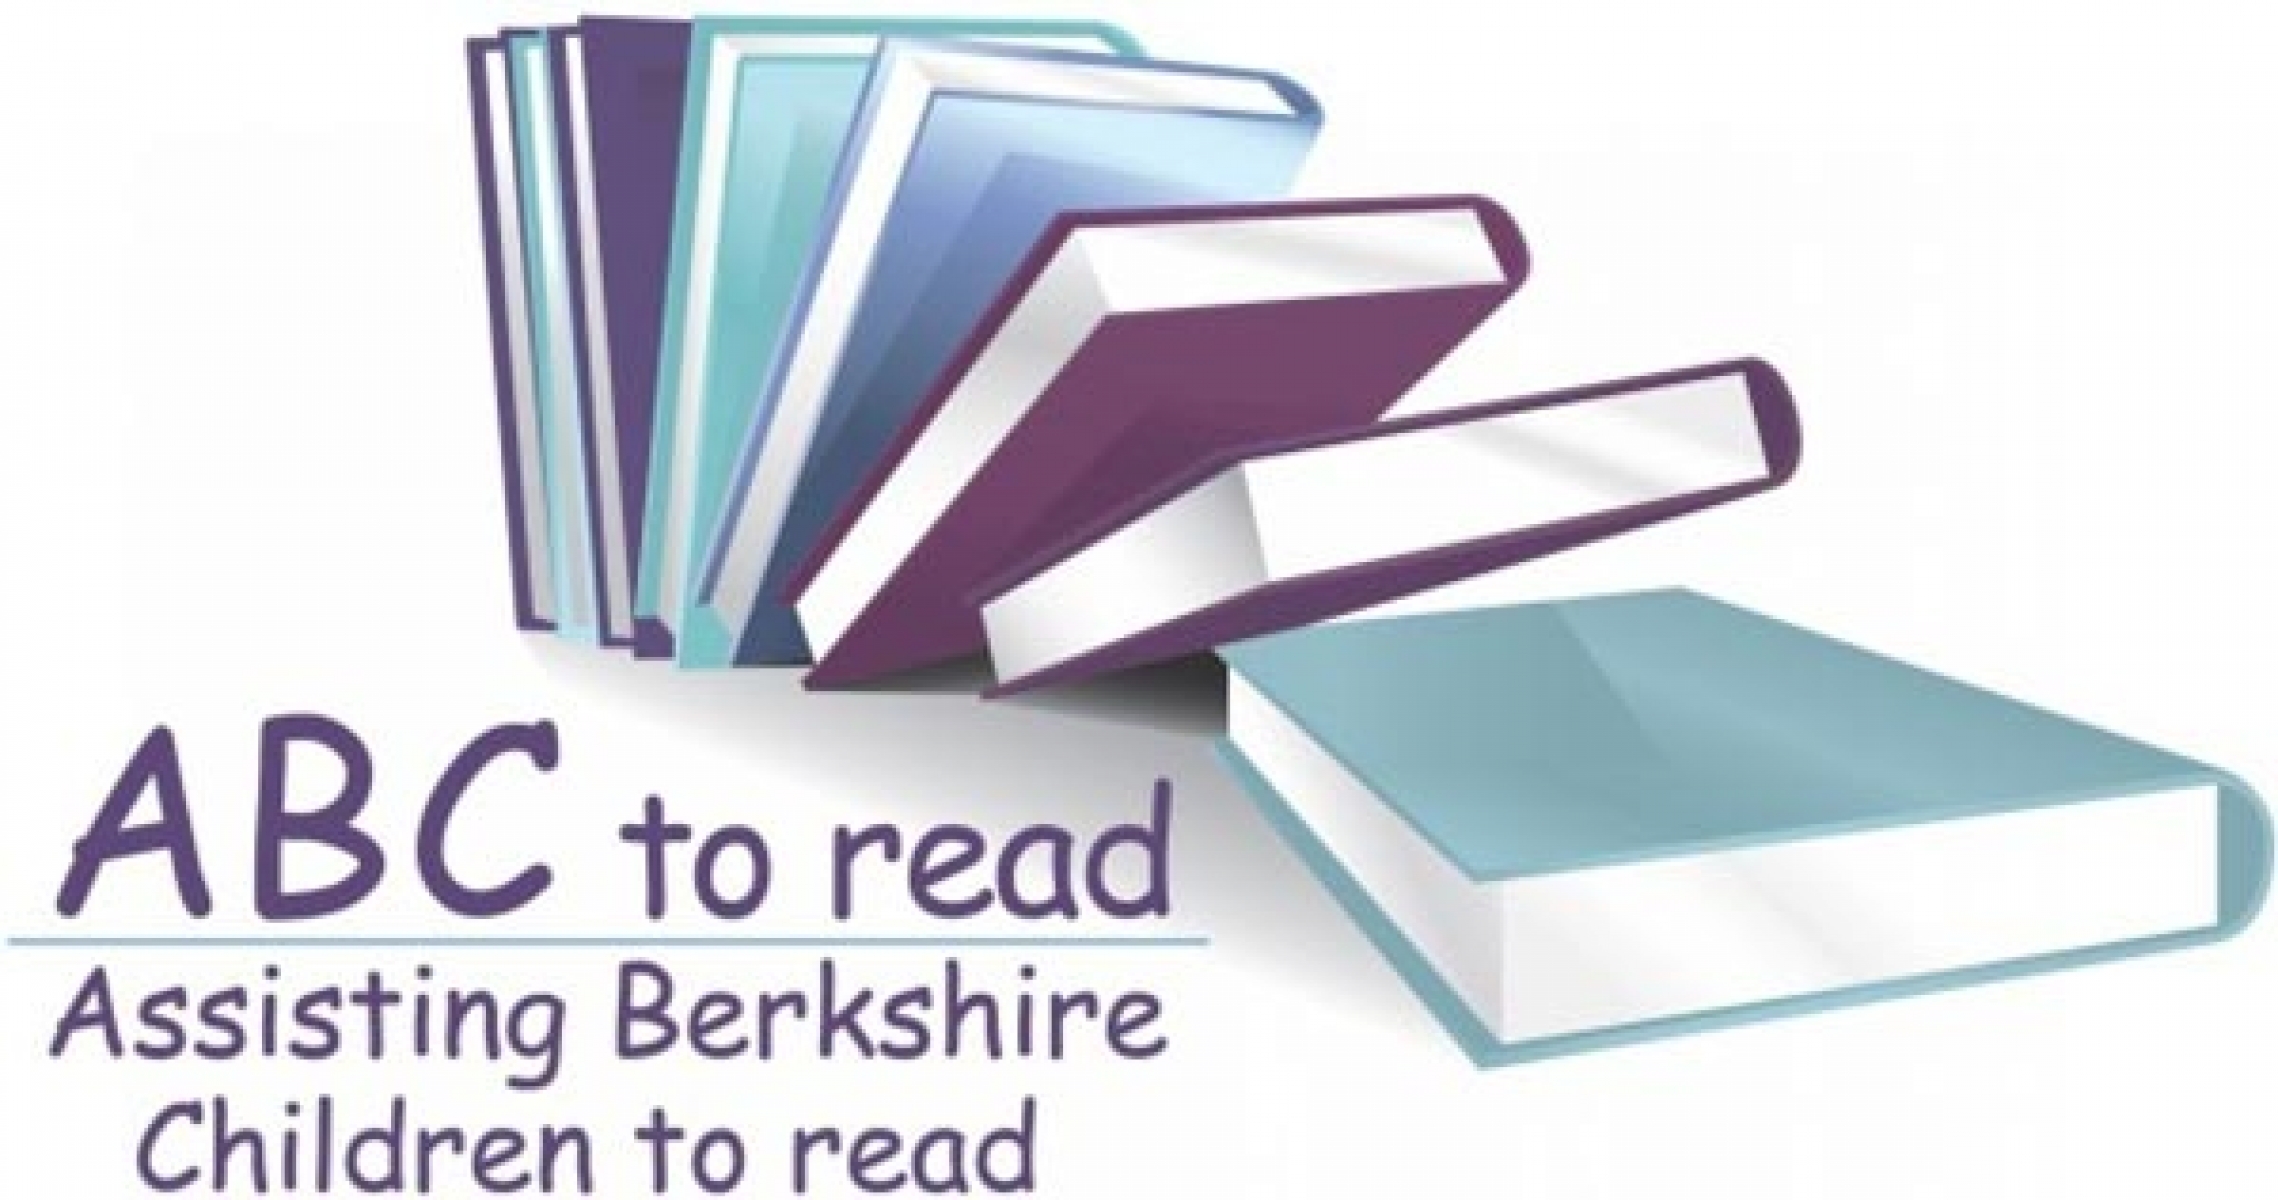 ABC to read (Assisting Berkshire Children) eCards